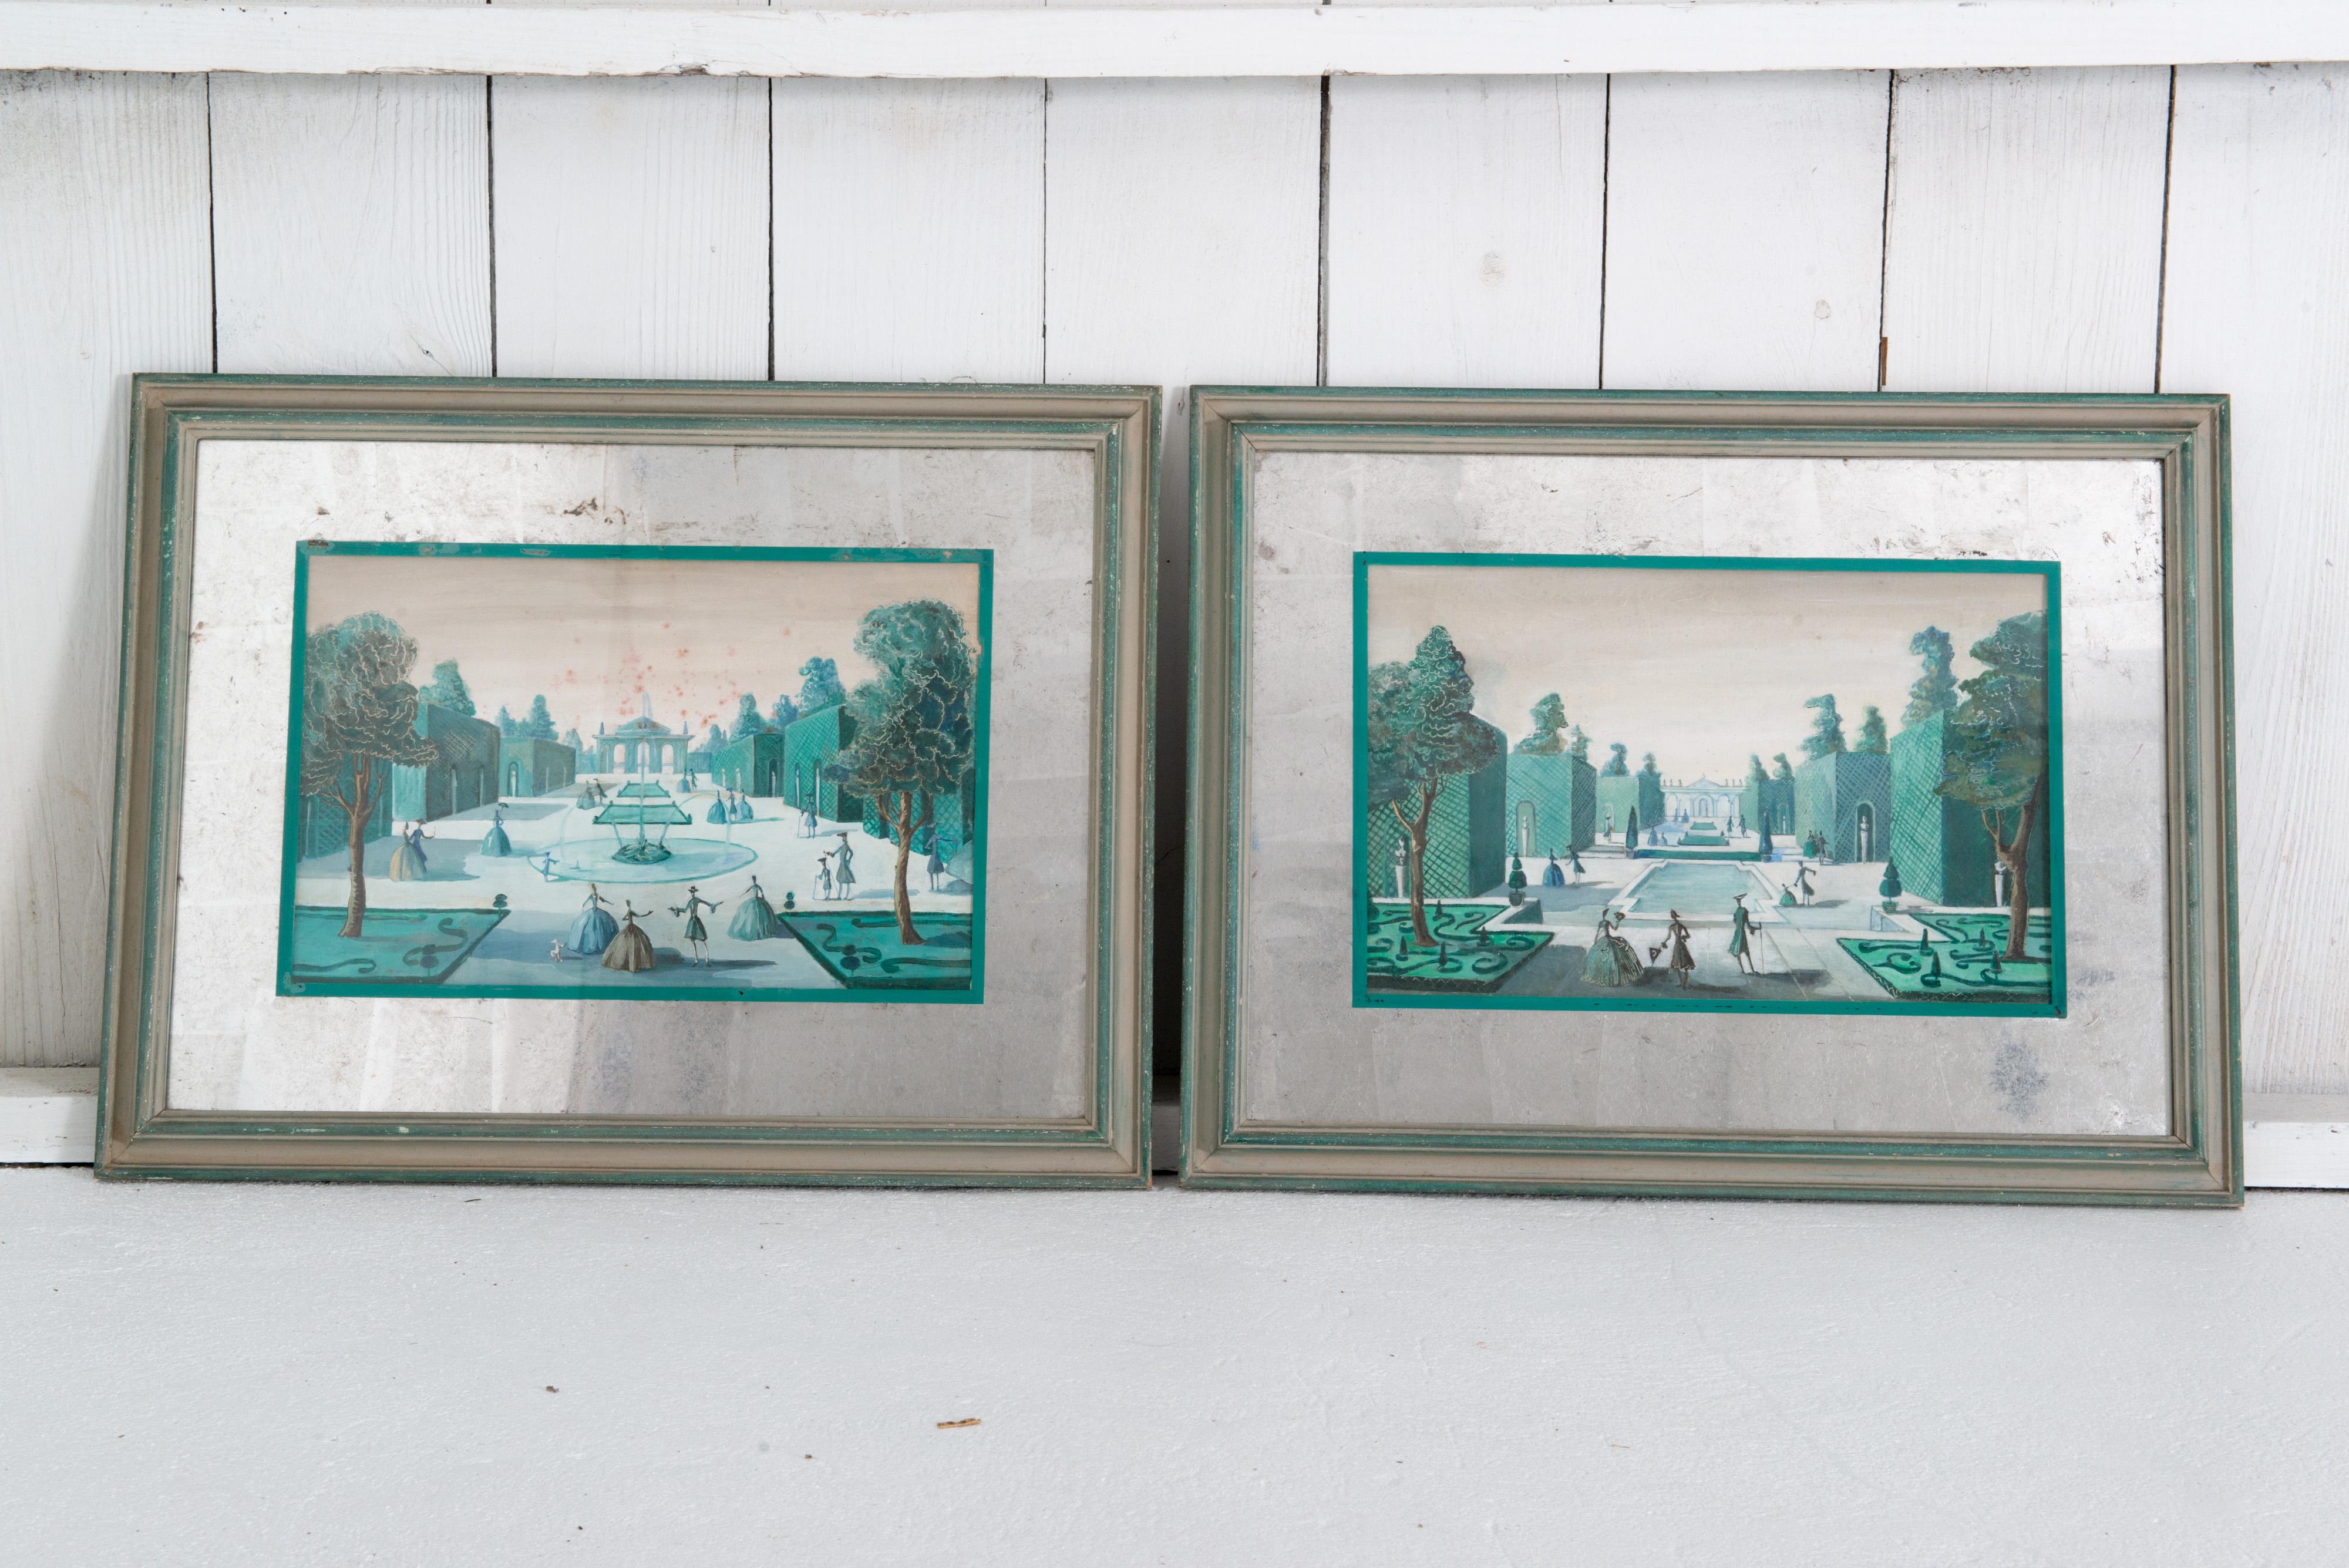 A beautiful pair of framed French Versailles- like garden landscapes. Wood frames are painted to coordinate with the paintings. The paintings are matted in silver leaf and the matching deep green color.